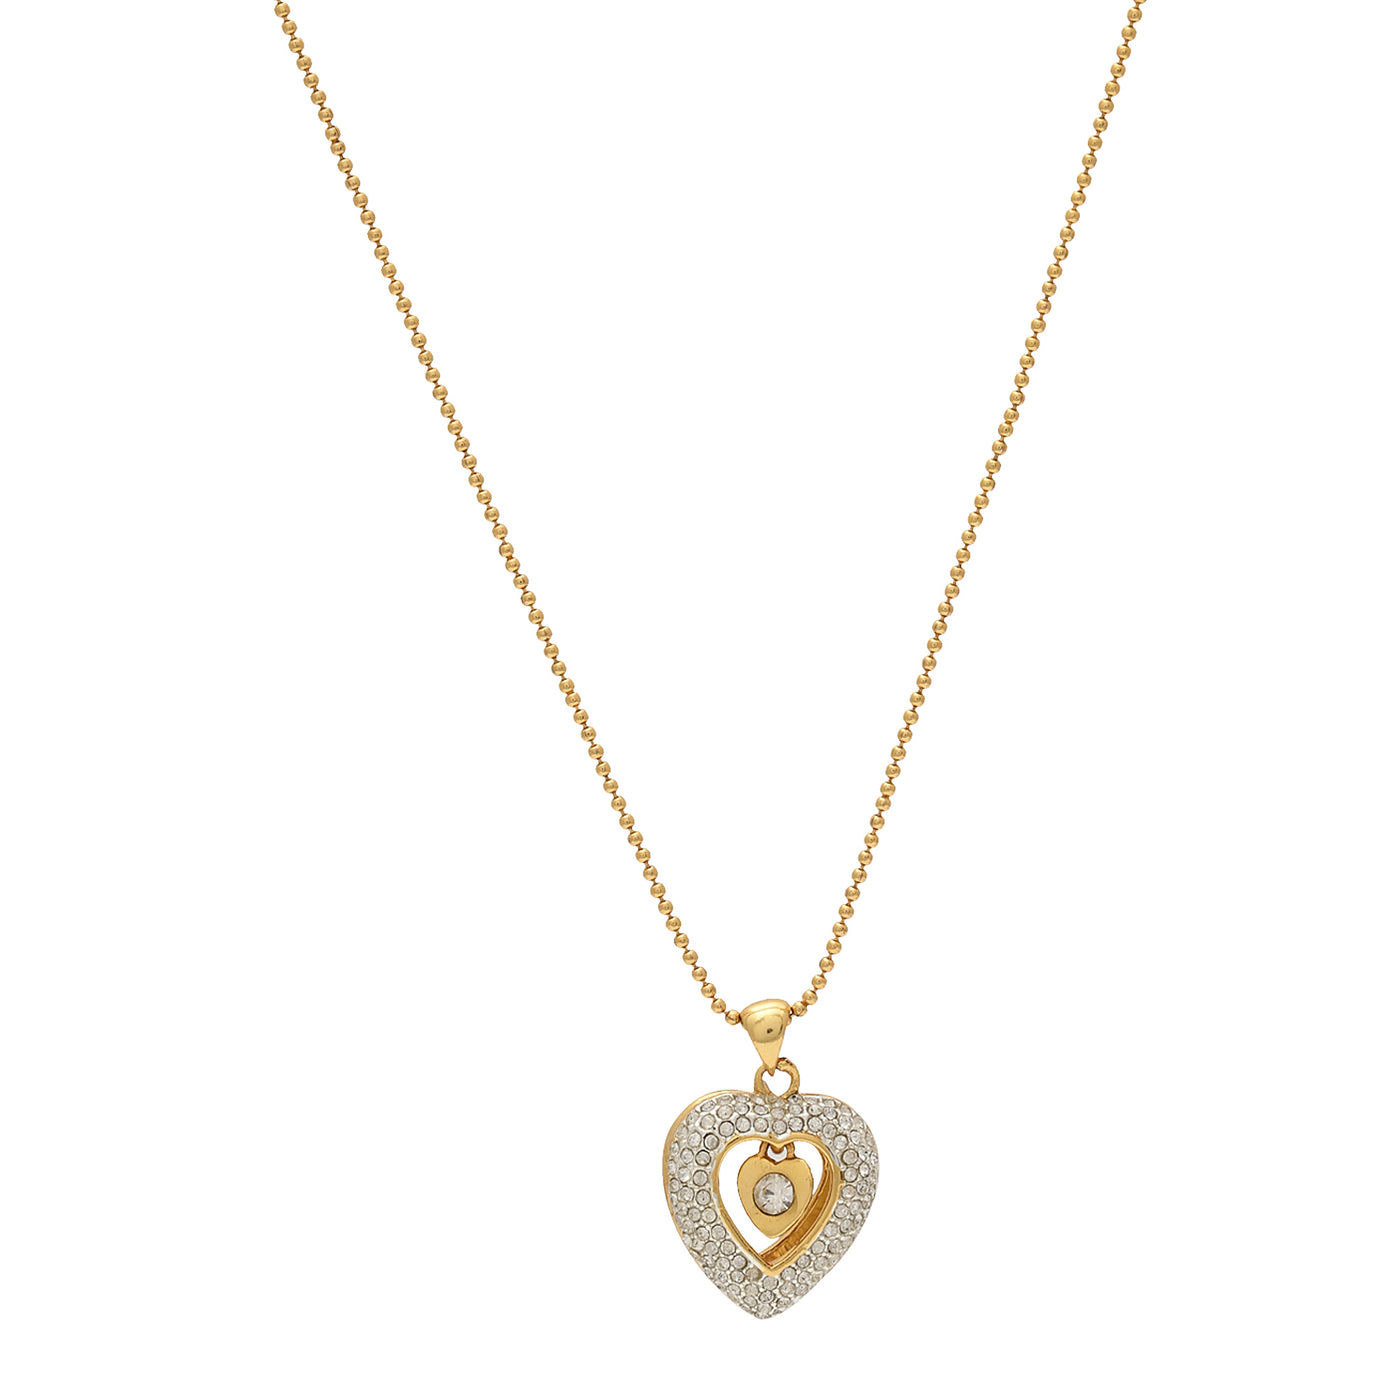 ESTELE - VALENTINE SPECIAL !! Stylish Gold and Silver plated Dancing Heart Pendant with chain